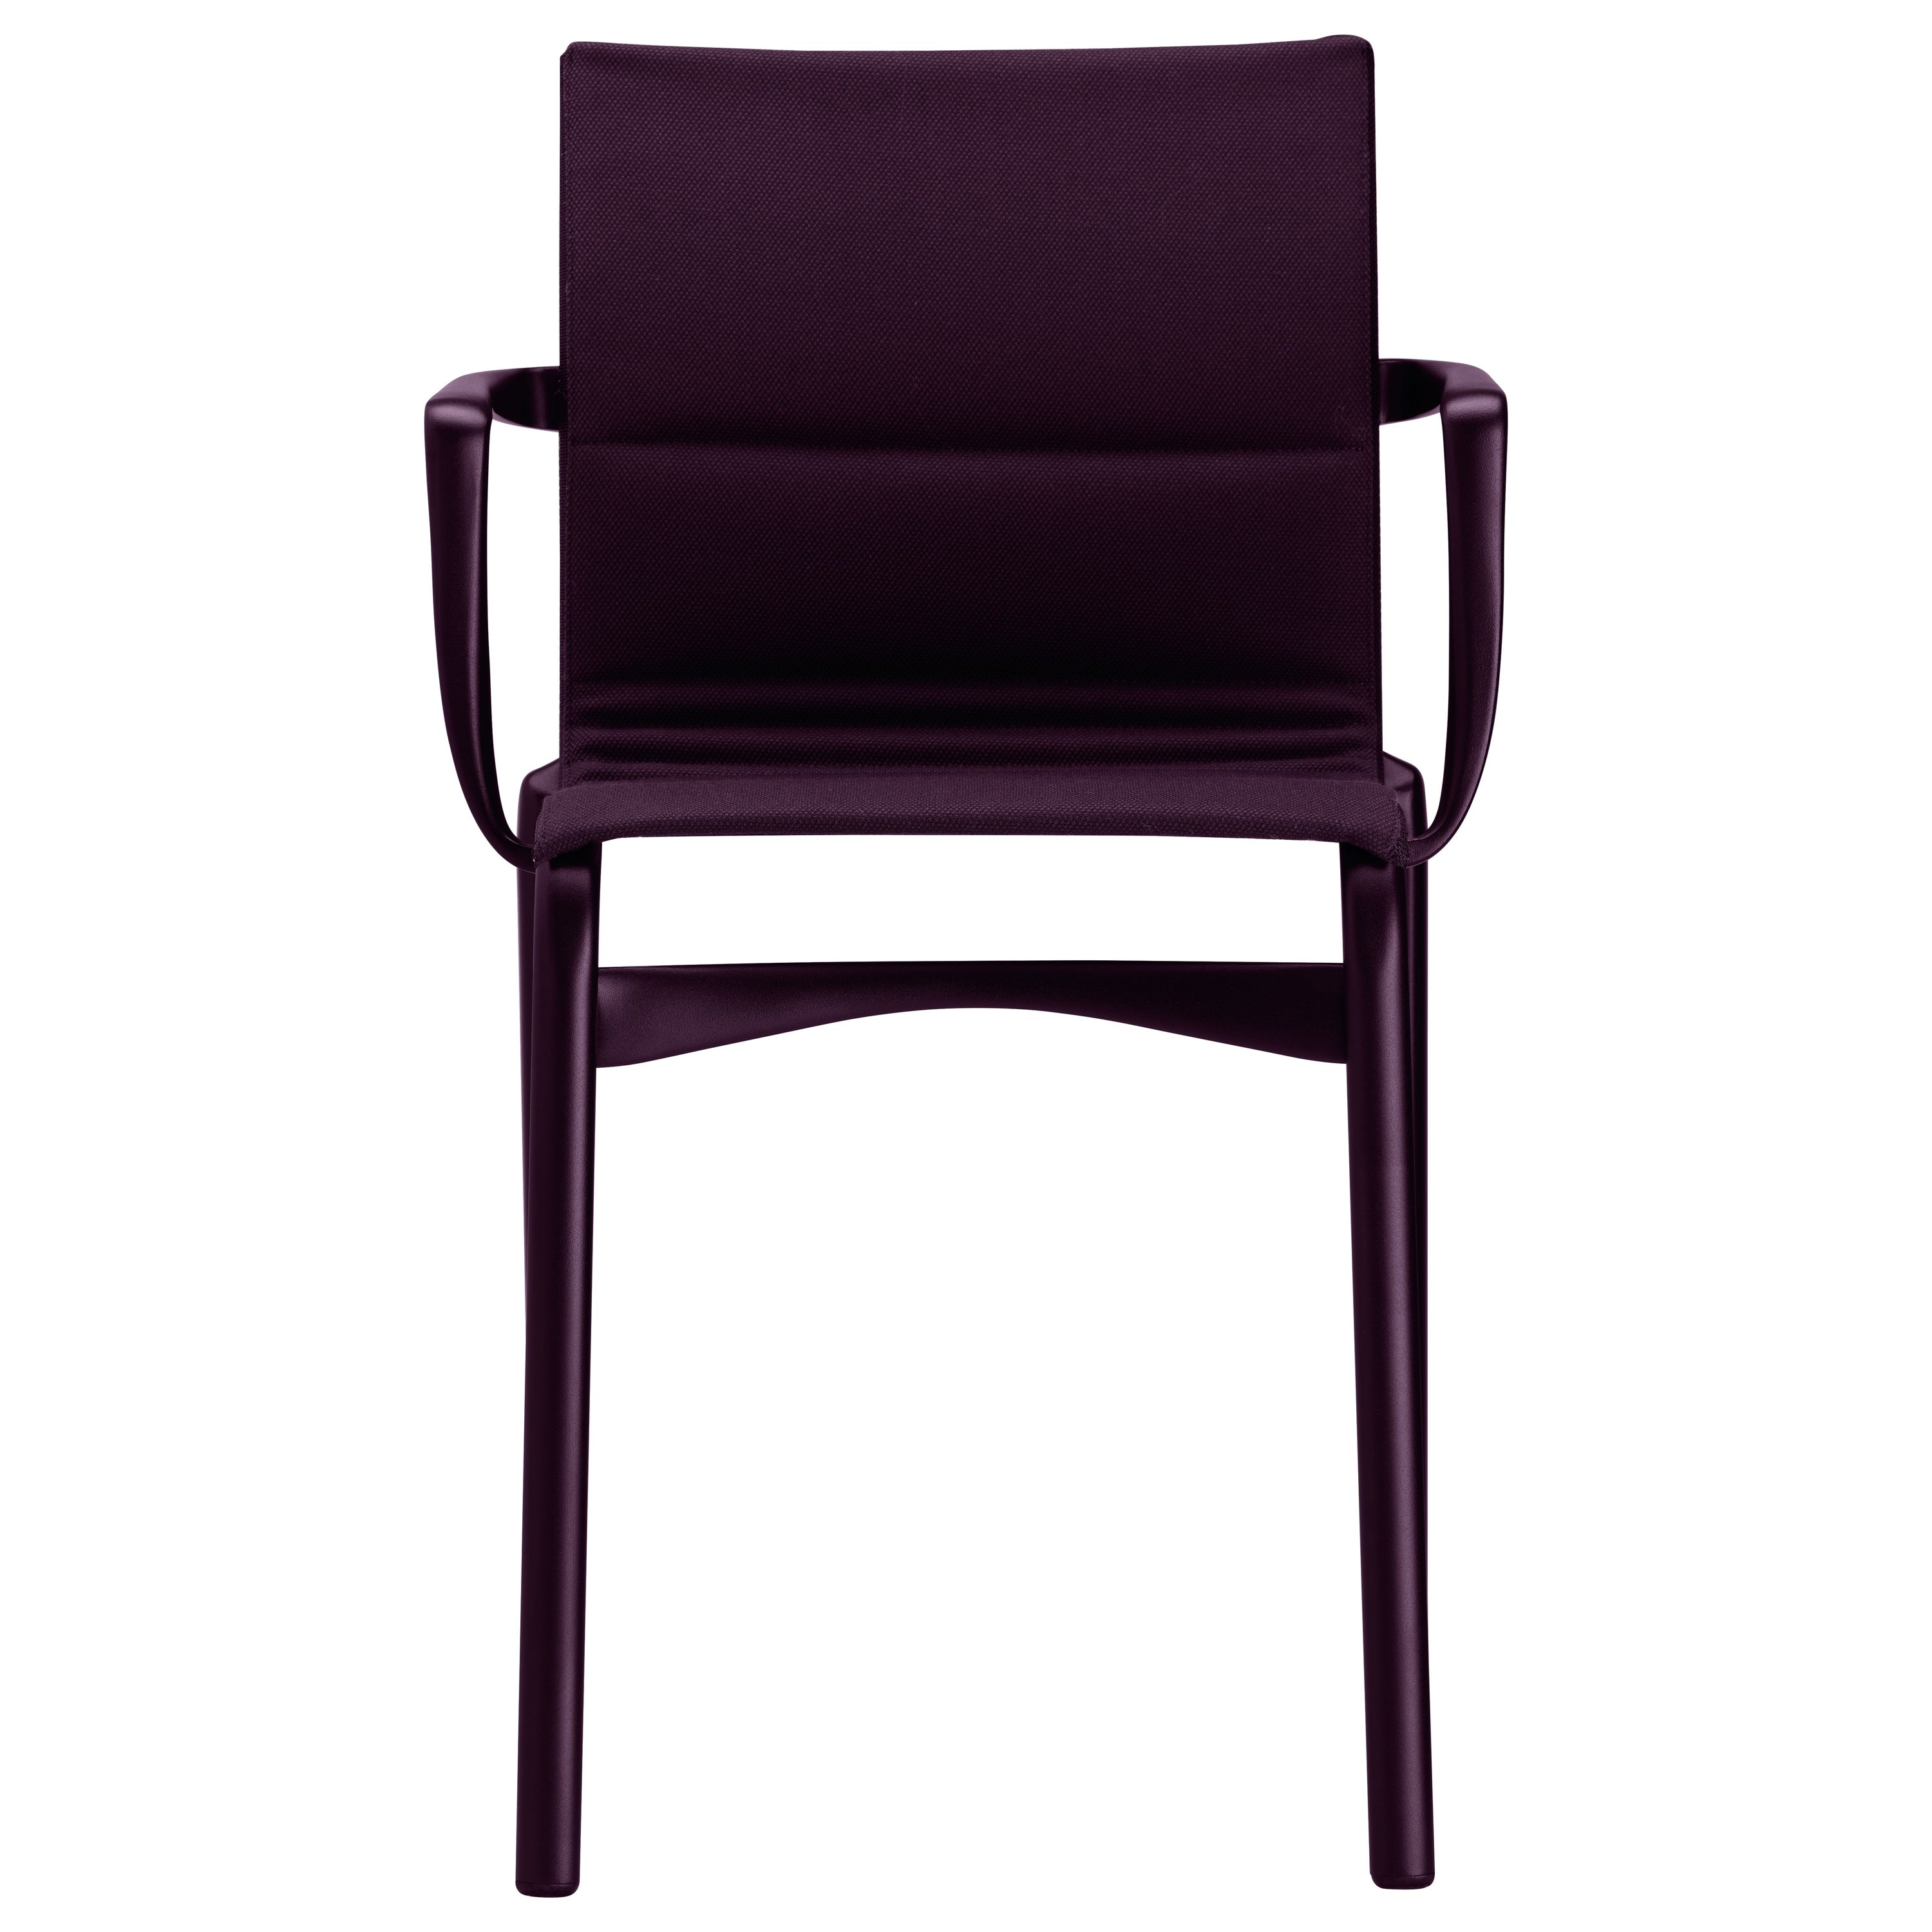 Alias 417 Highframe 40 Chair in Purple with Aubergine Lacquered Aluminium Frame For Sale